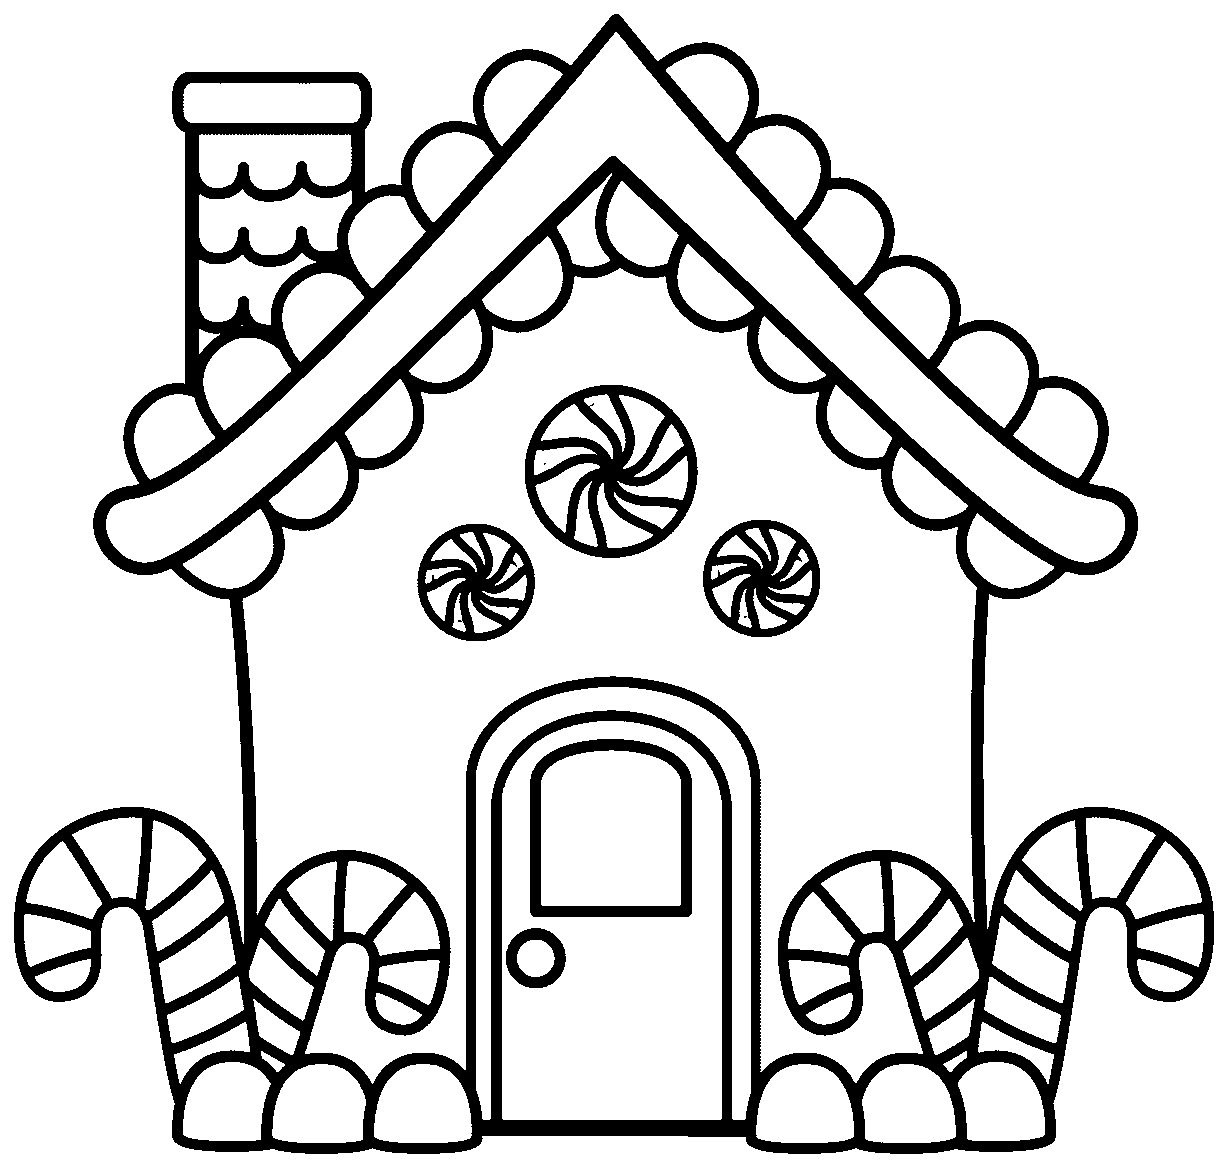 Gingerbread House Coloring Pages.